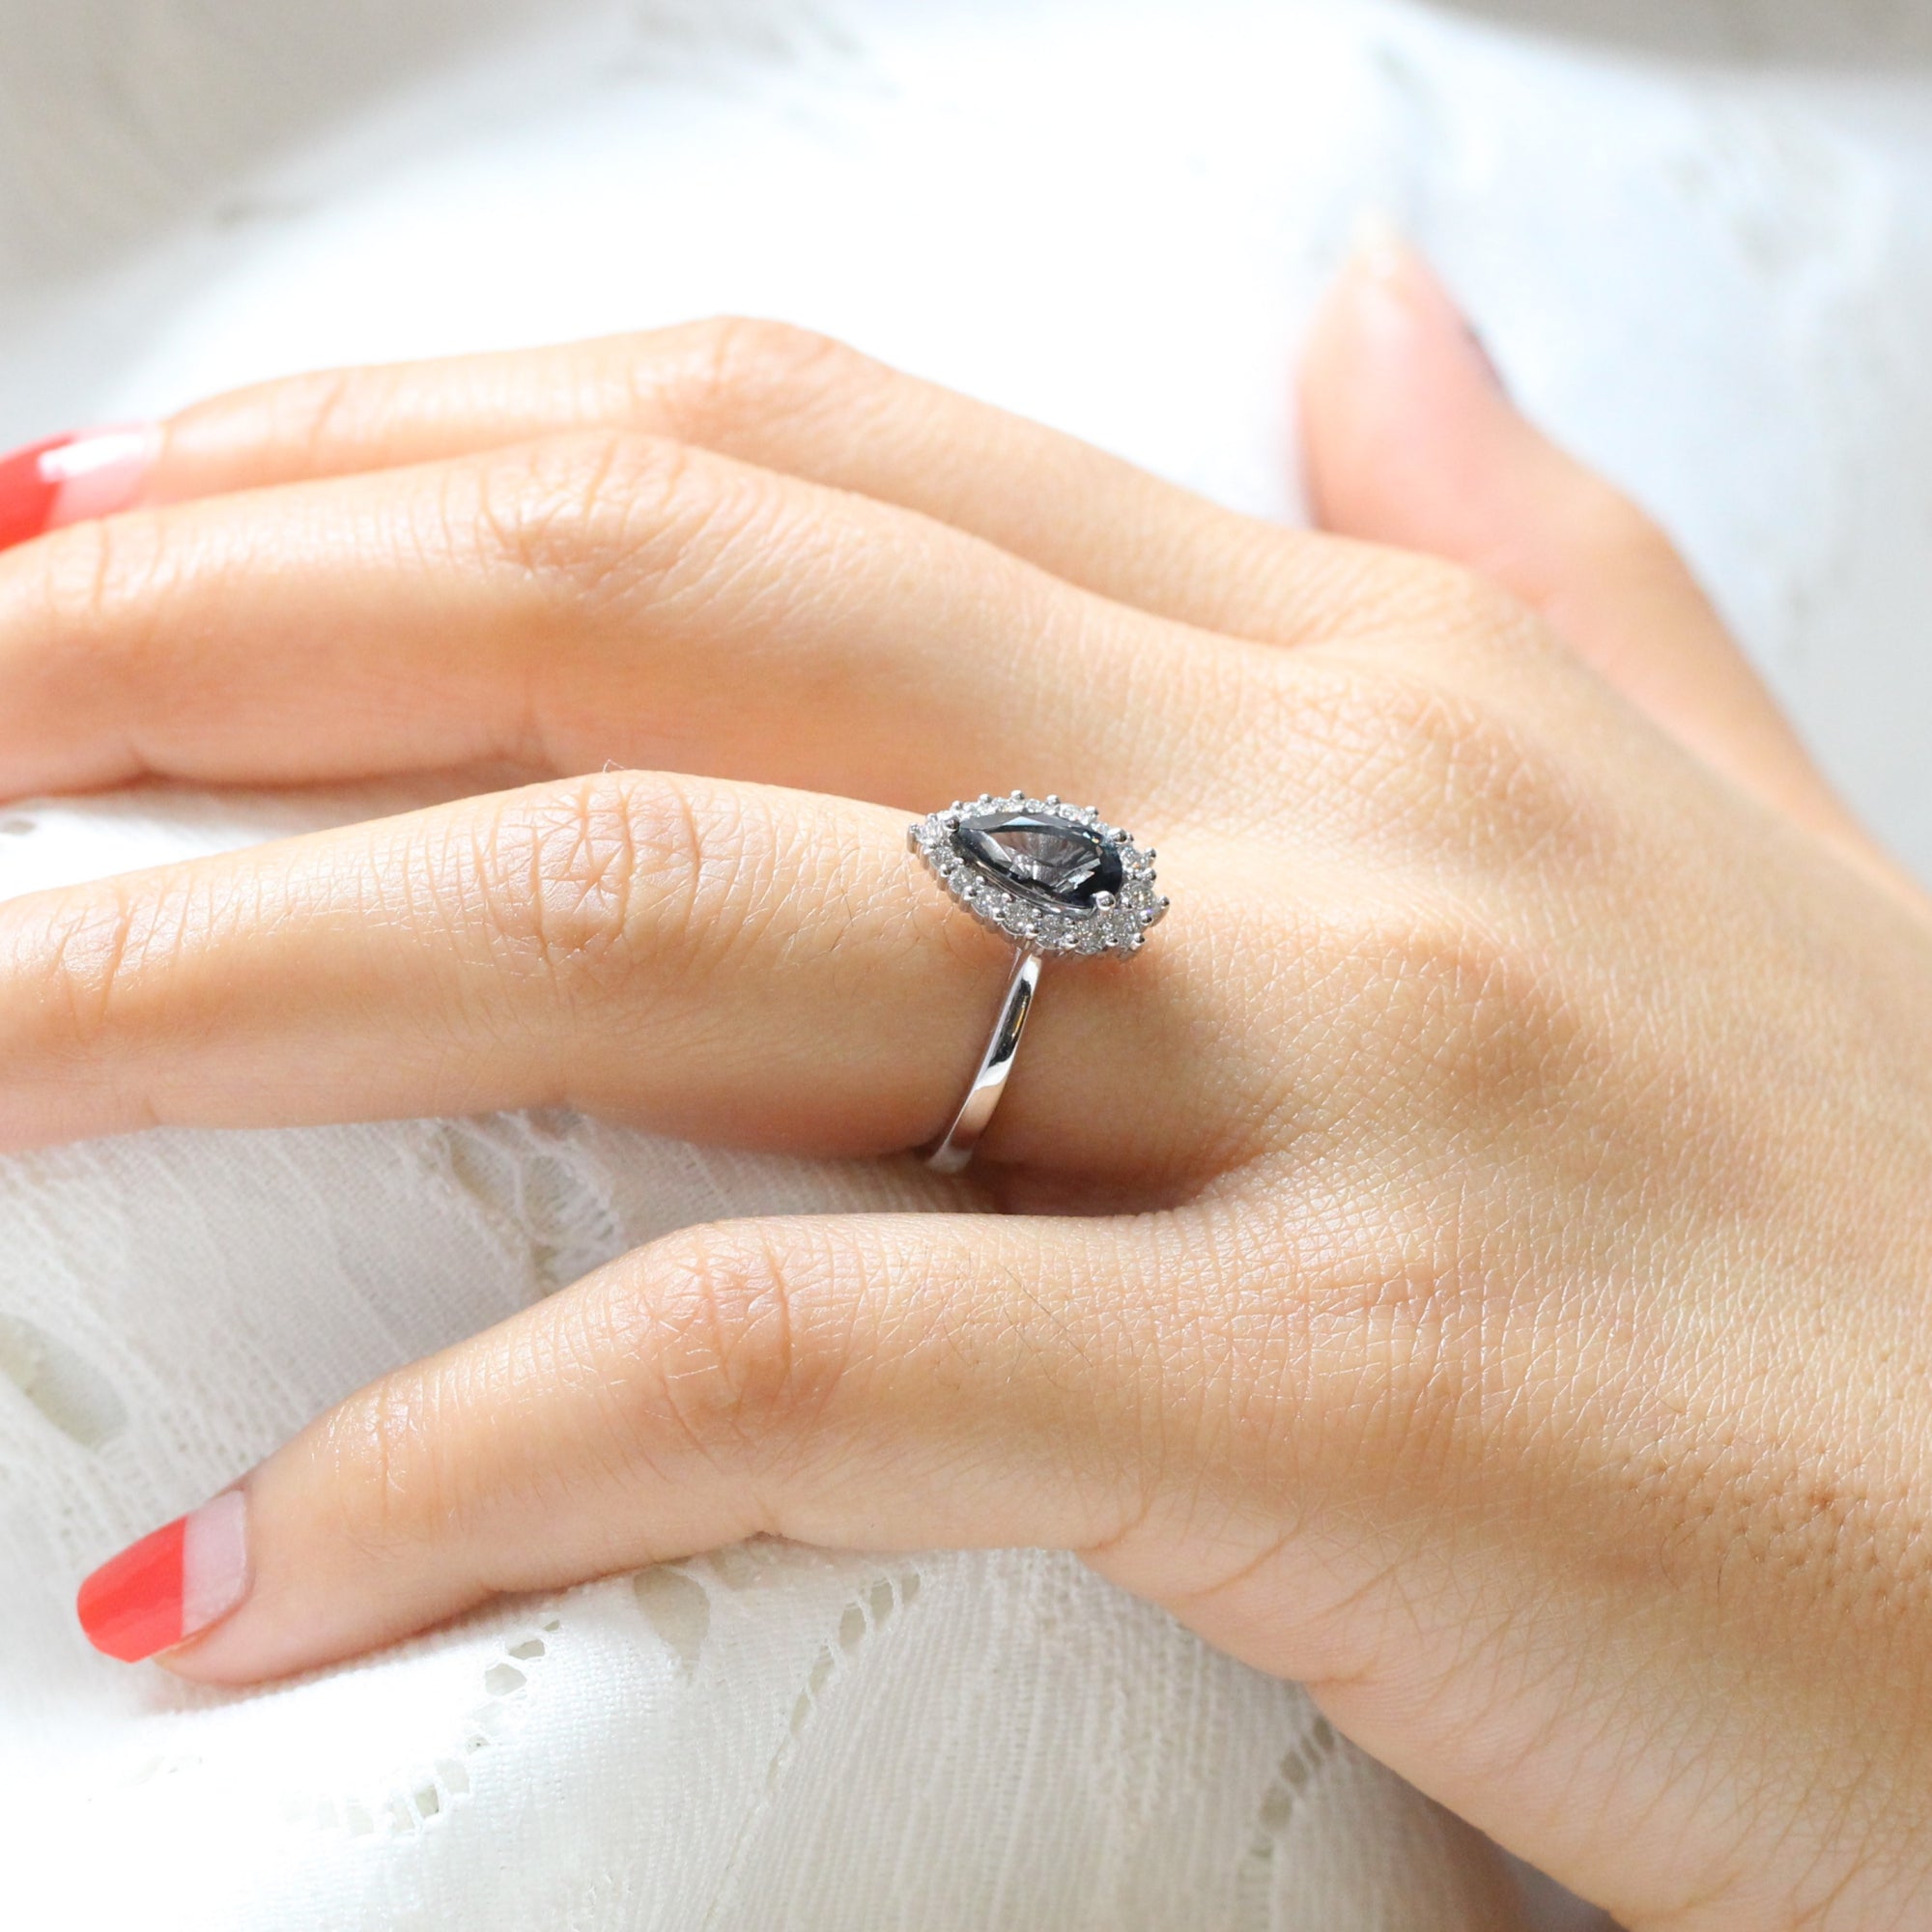 grey spinel ring white gold pear cut salt and pepper diamond ring halo engagement ring la more design jewelry